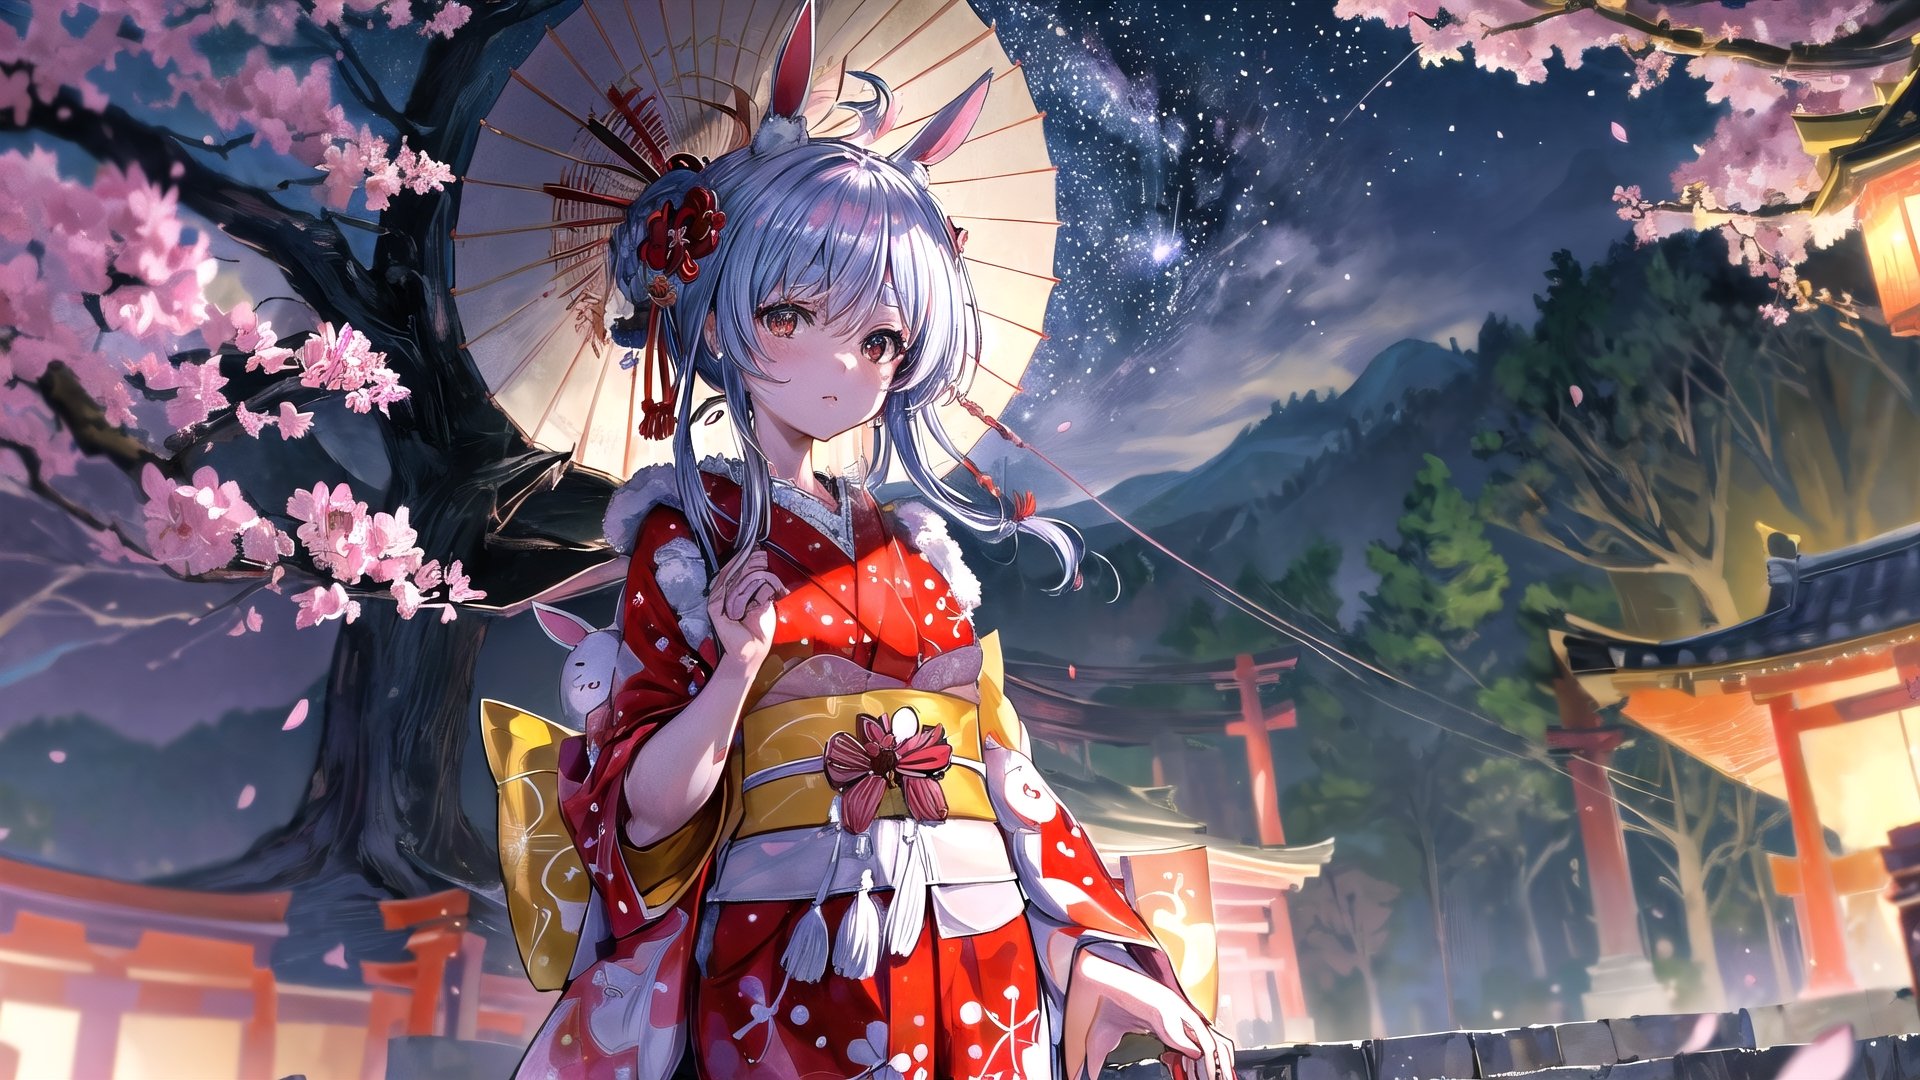 //Quality
(((best quality, 8k wallpaper))), ((detailed eyes, detailed illustration, masterpiece, ultra-detailed)),

//Charater
1girl, solo, usada pekora, 
kimono1, (red kimono:1.5), wearing kimono, wearing new year kimono, 

// Pose
upper body, (dynamic angle), 
looking at viewer, 

// Background
((detailed background)), midjourney, yofukashi background,perfect light, (cherry blossoms), extremely delicate and beautiful, ((background: shrine, night stars iridescent)), ((nightime, detailed stars)), Night view in the shrine, A girl prays in front of a shrine at night, behind her is a row of lanterns and a red torii gate